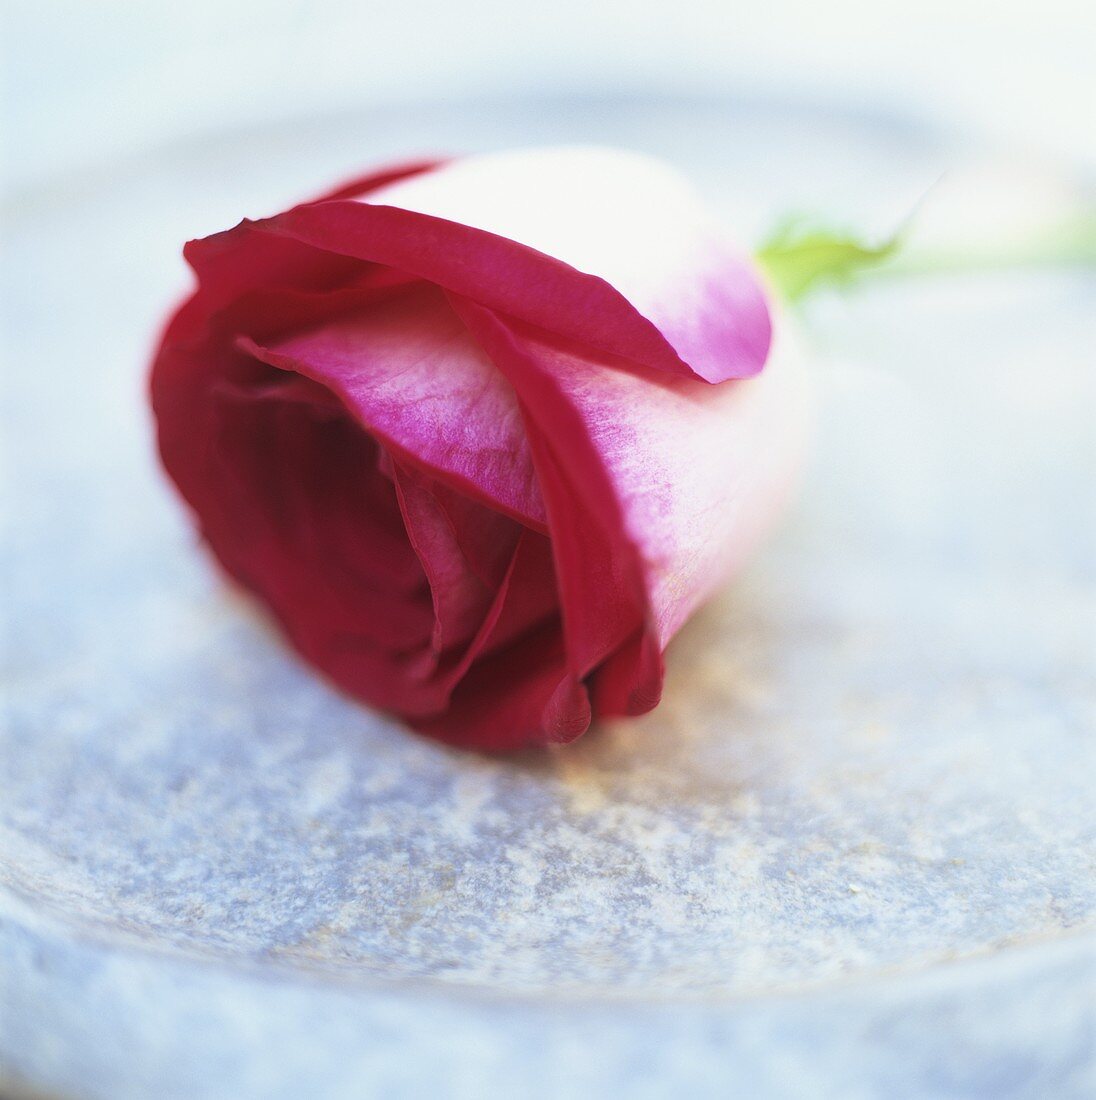 A rose lying in a bowl